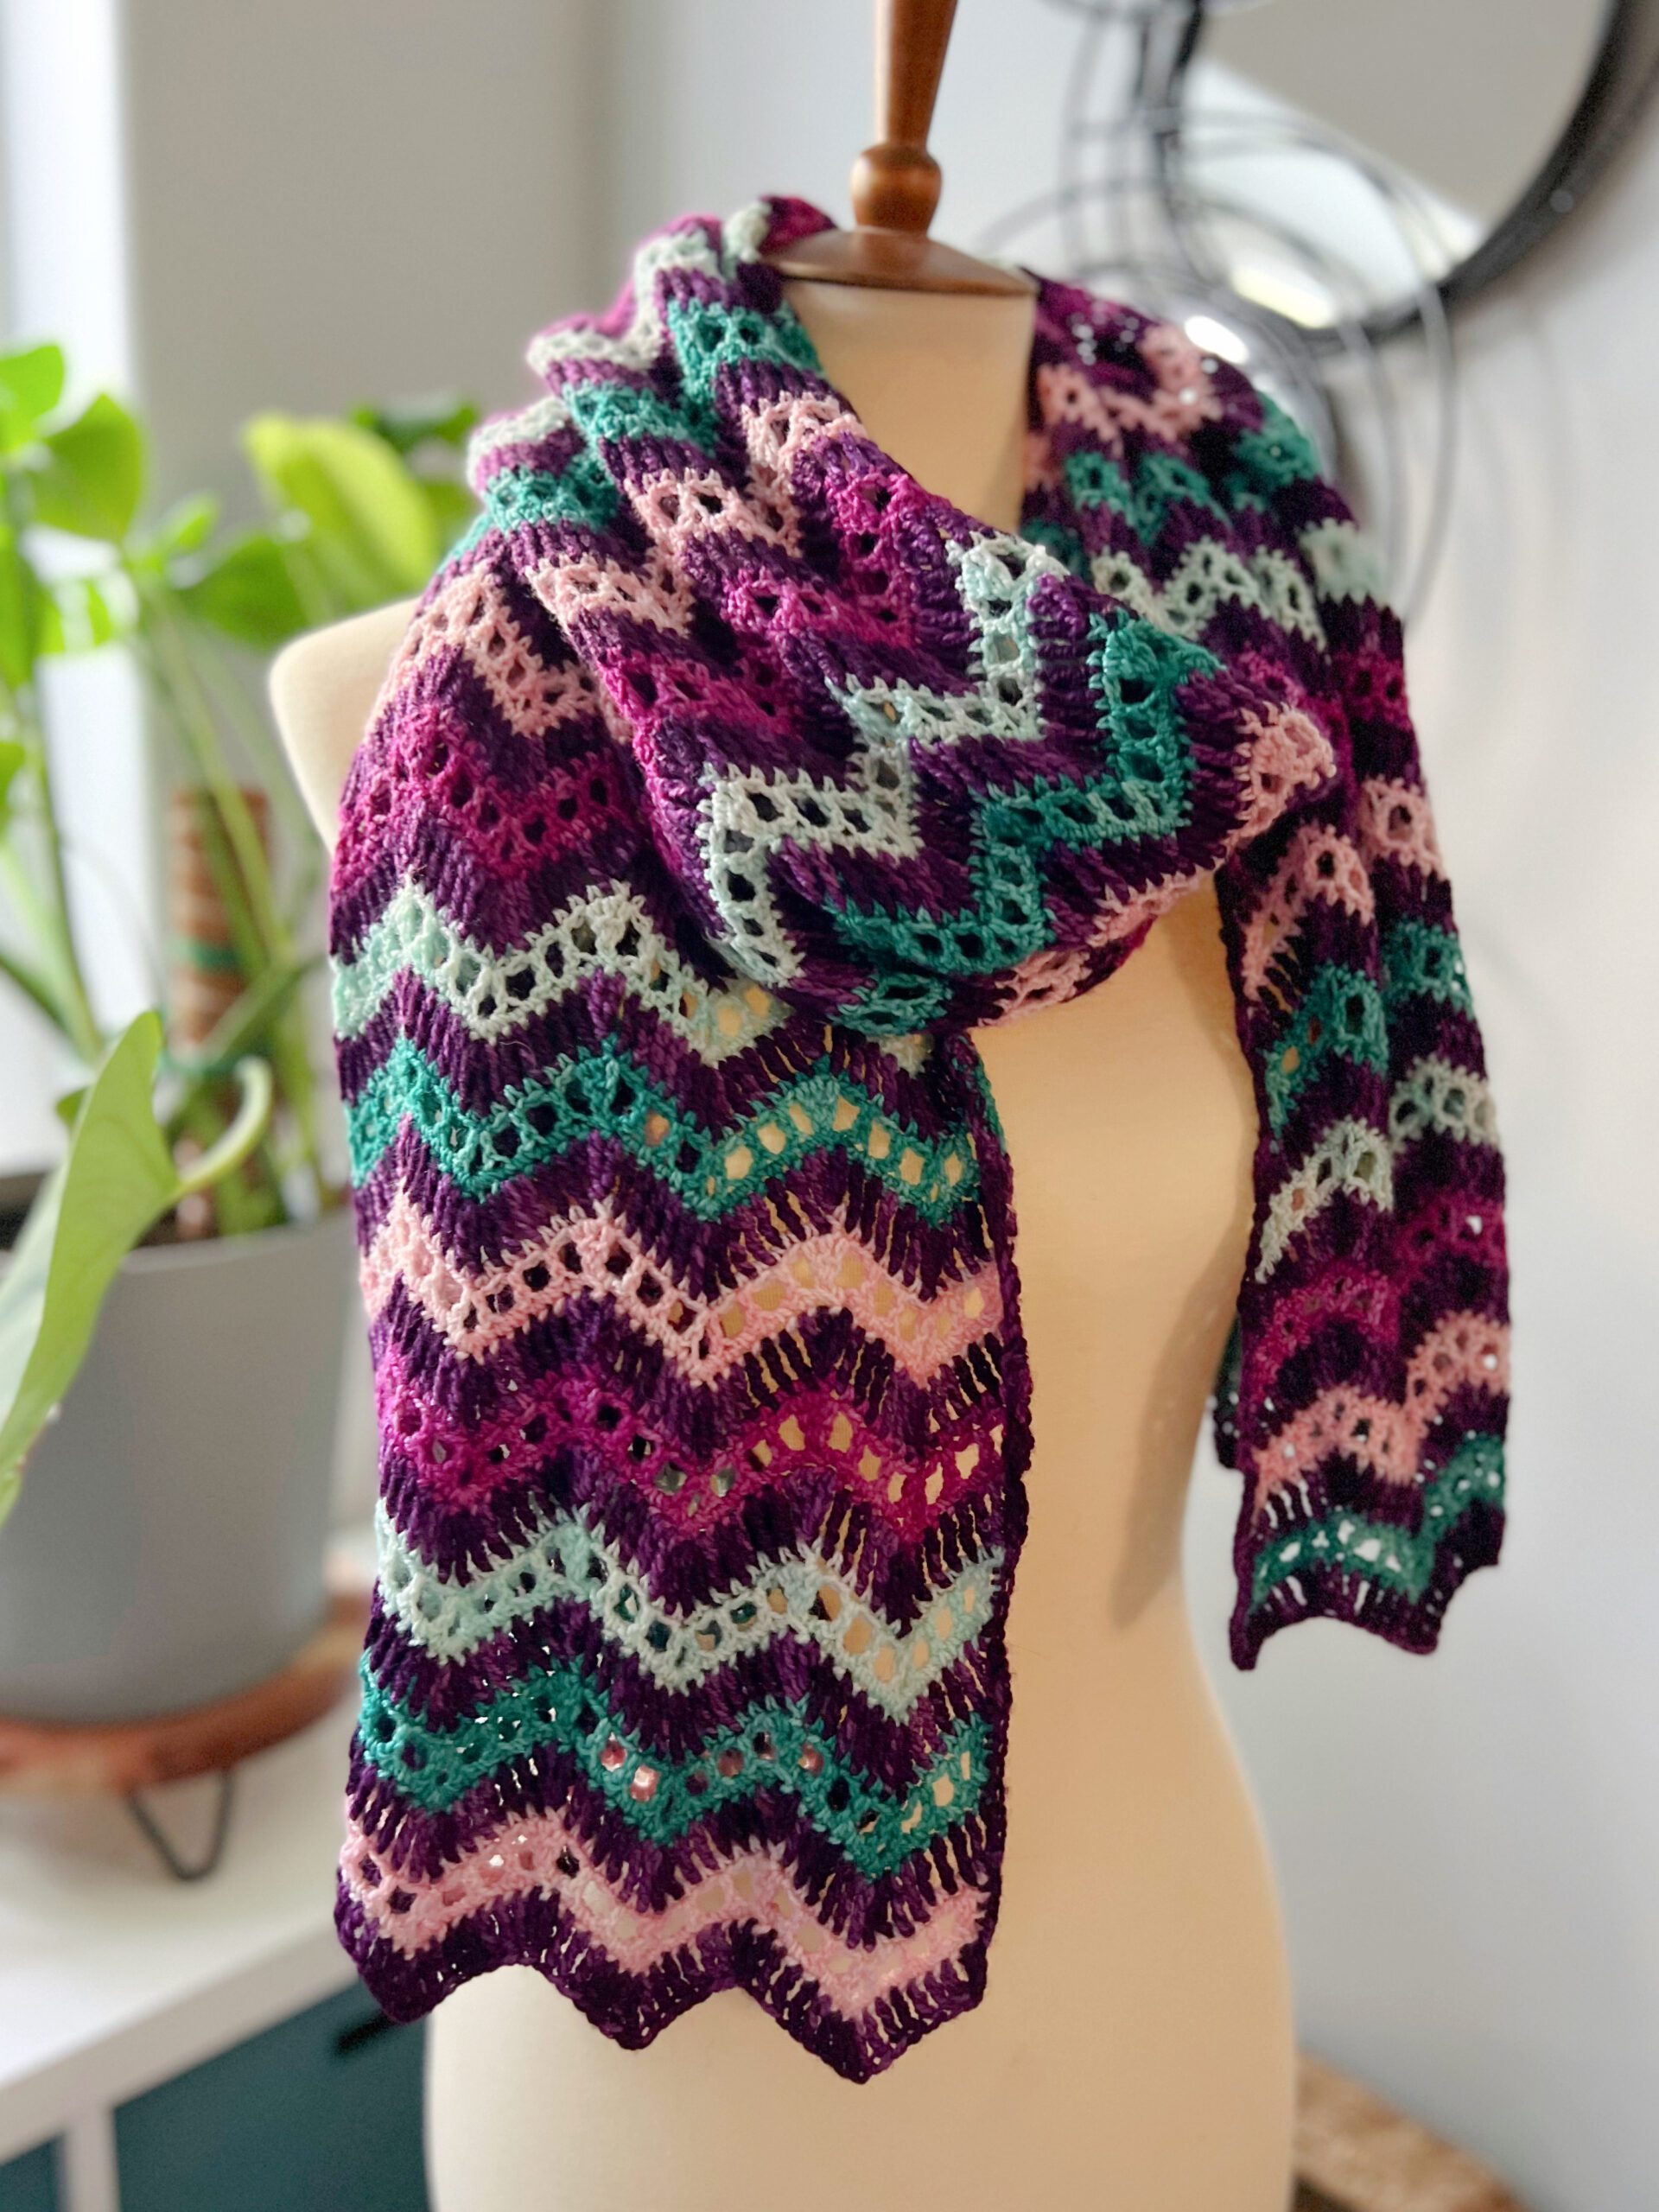 Wide chevron crochet shawl on mannequin in 5 colors - Marly Bird